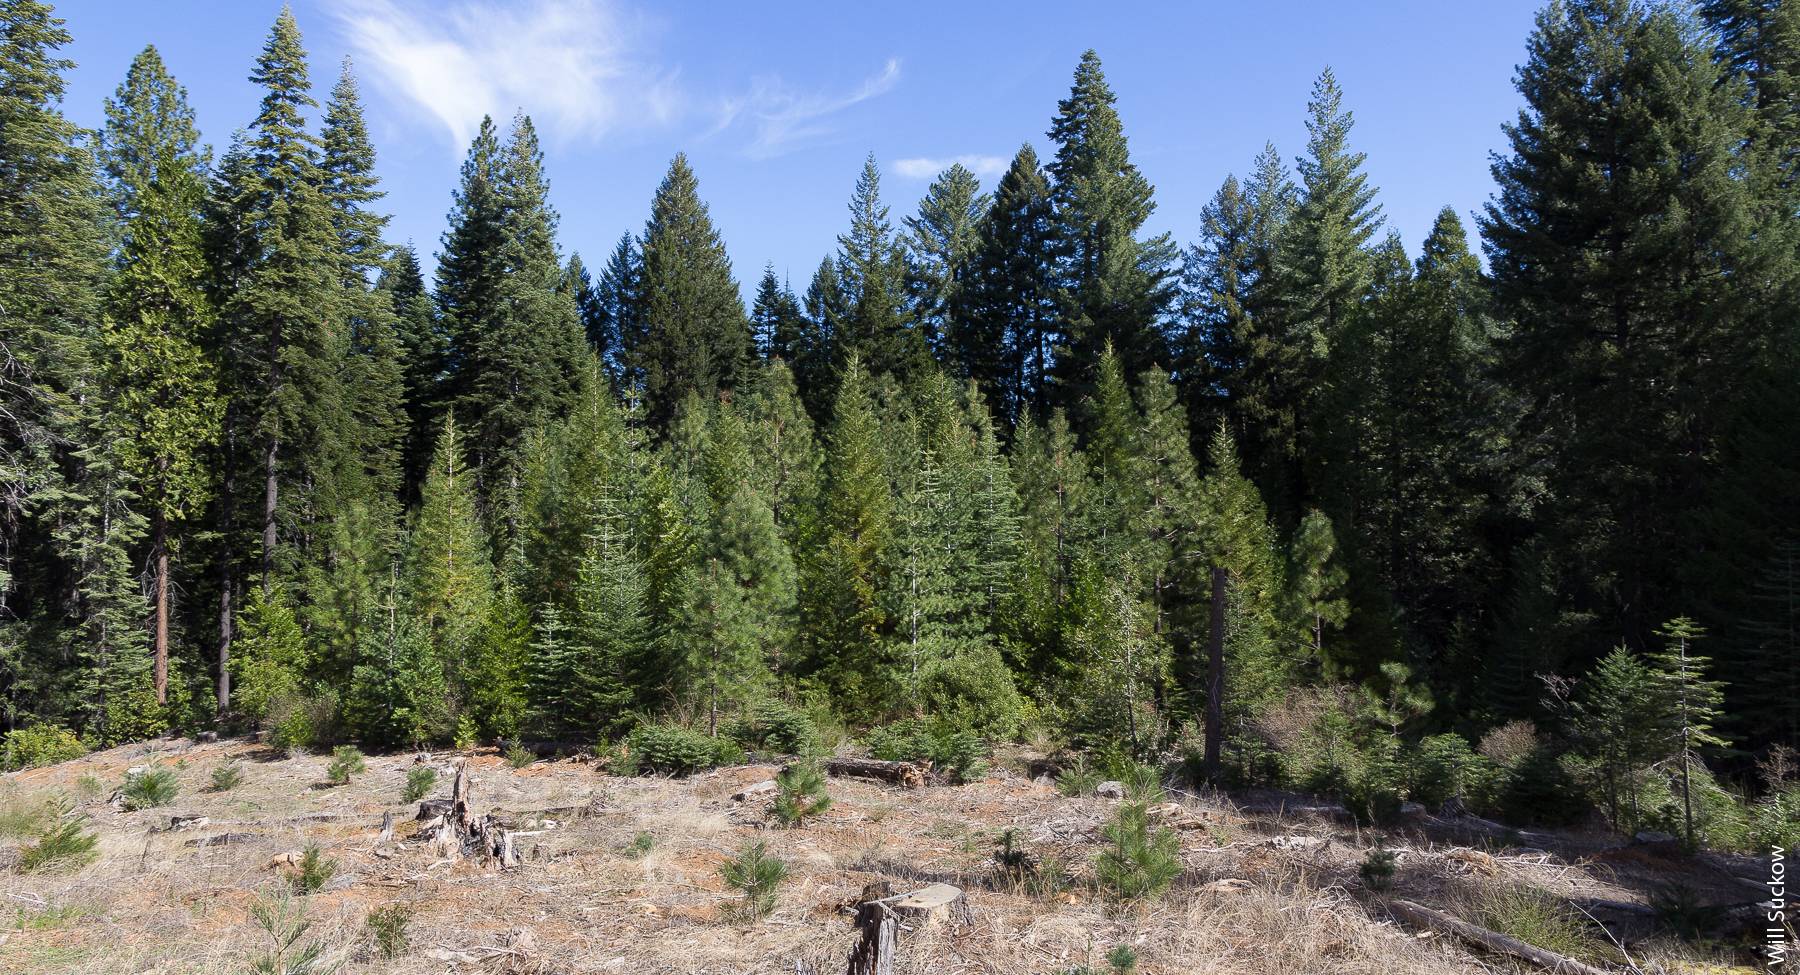 Group selection: Creating small openings of about 1 acre in size and planting with native conifers can be an option for restoring high-graded forests on nonindustrial lands. This image shows an 18-year-old, ¼ acre patch in the mid-ground and a 4-year-old, ½ acre patch in the foreground.